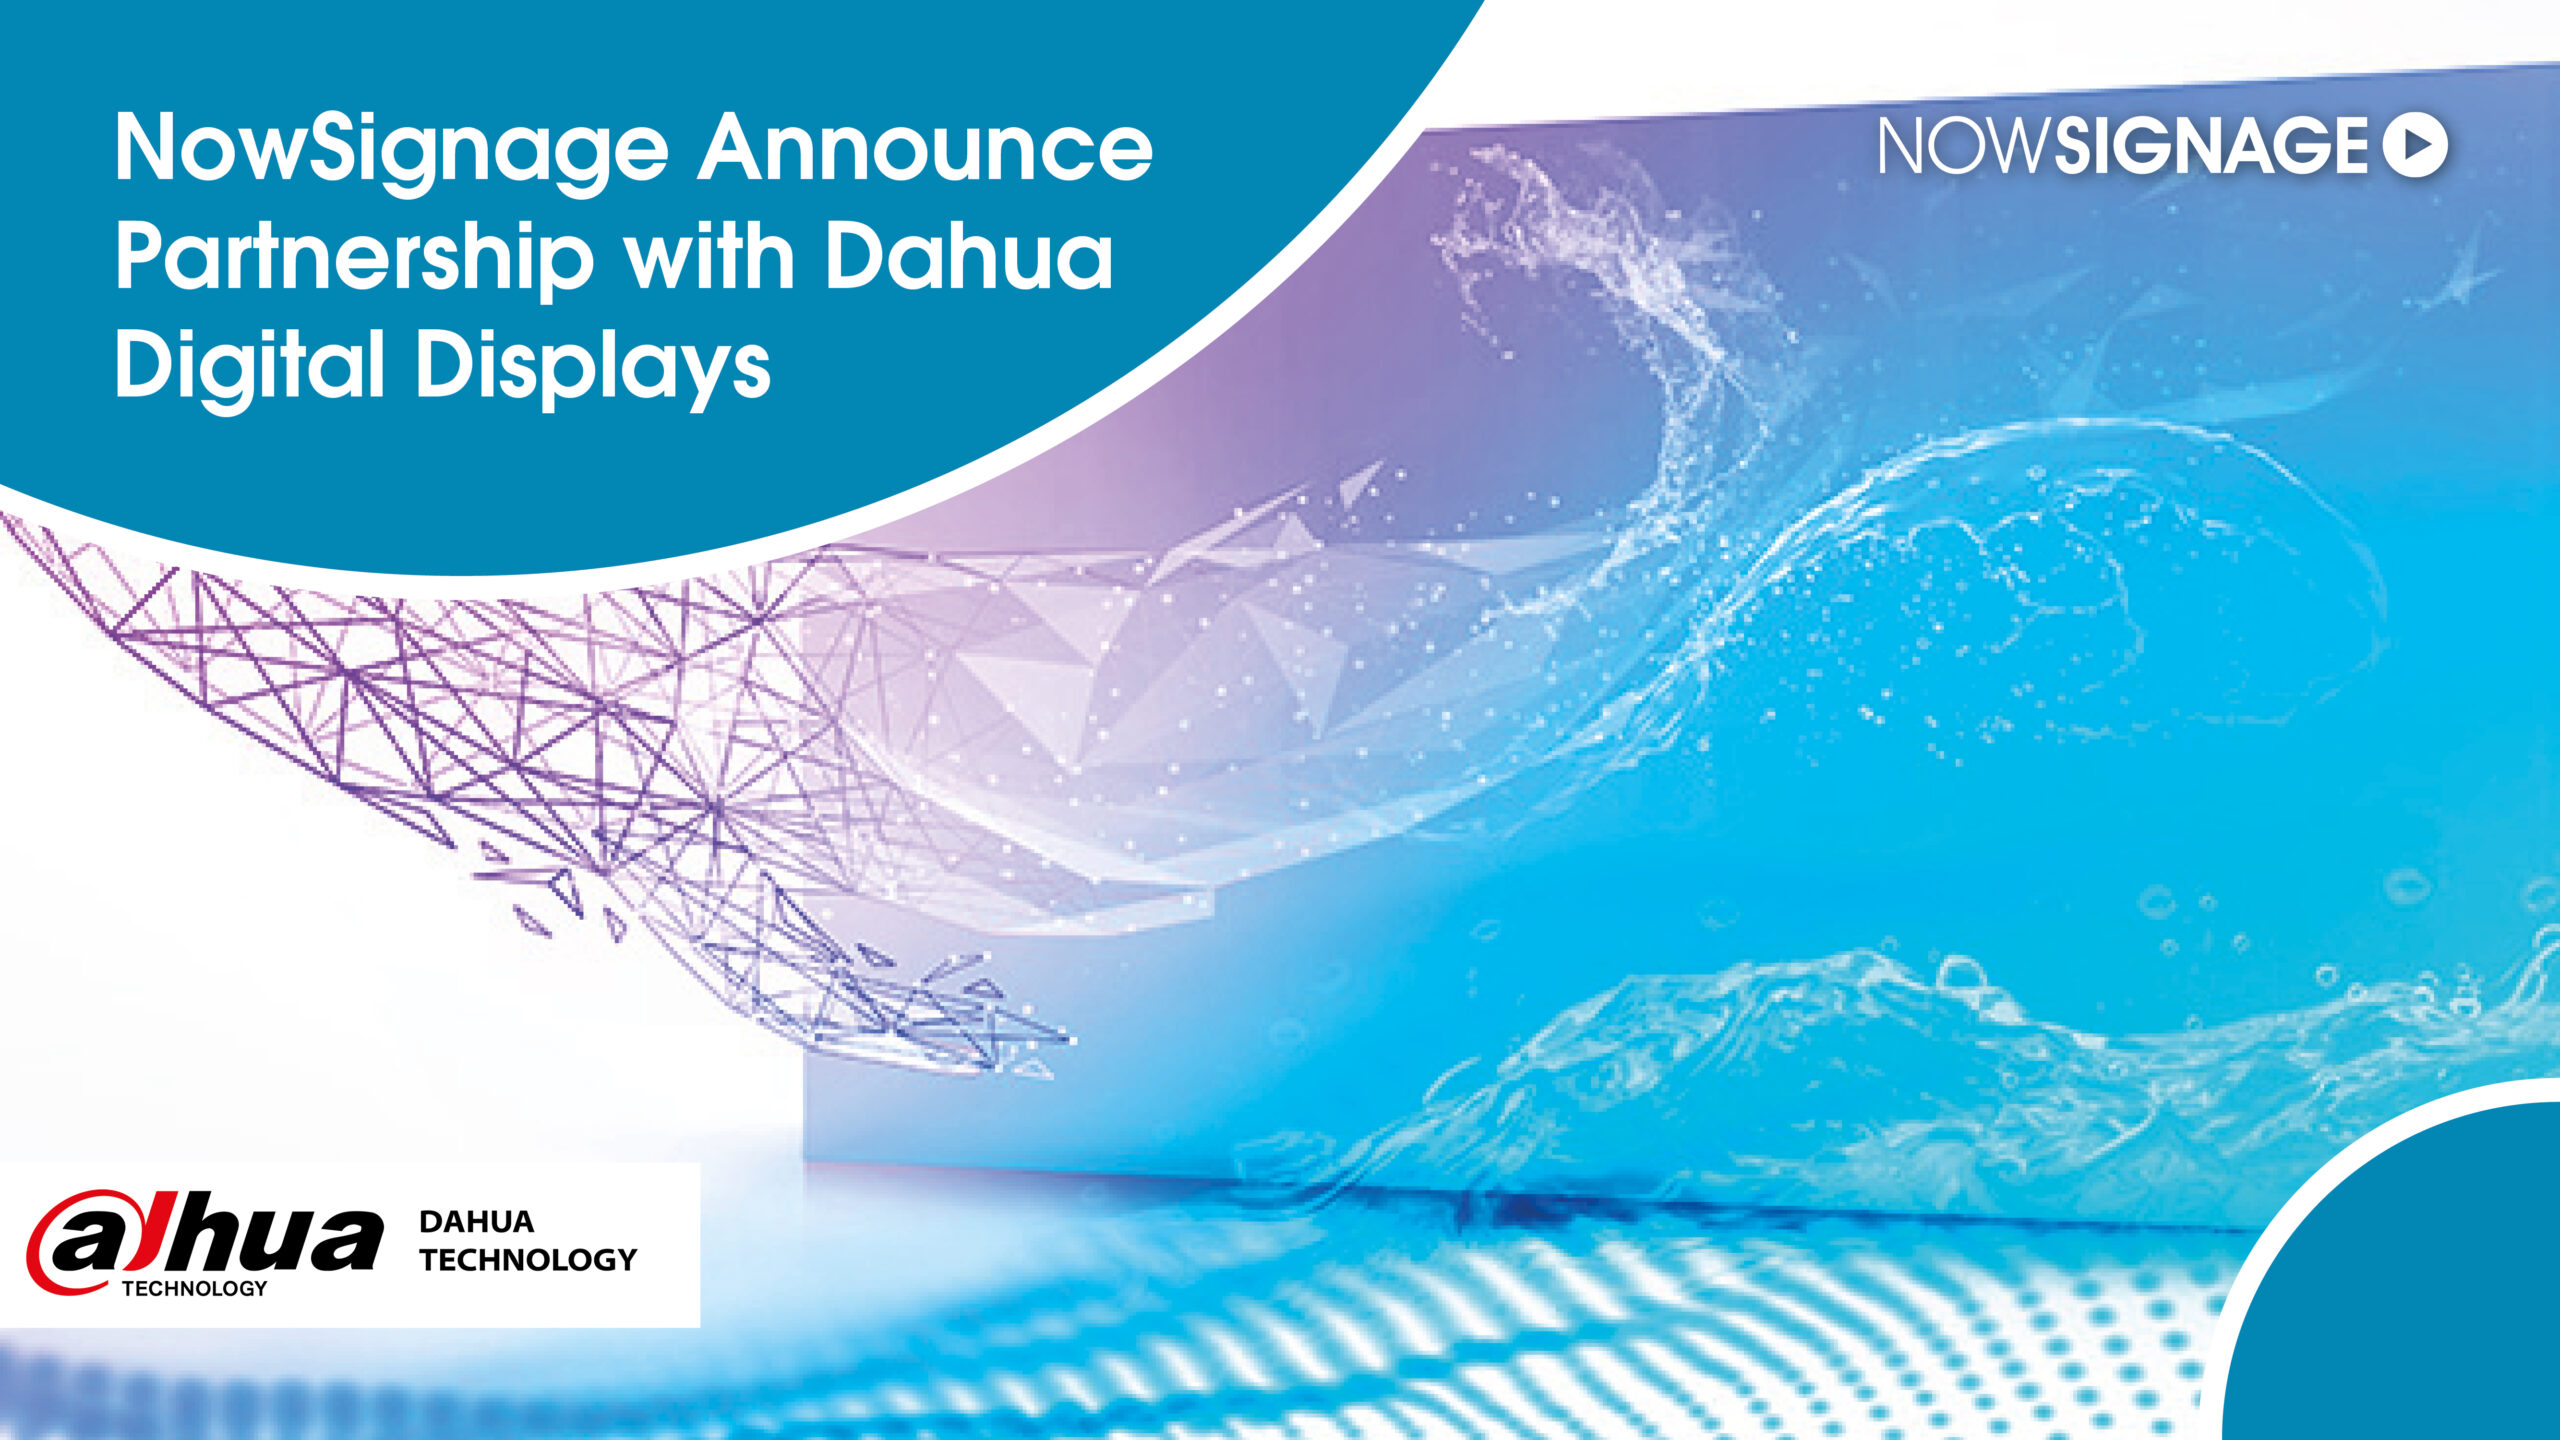 NowSignage Partner with Dahua to Deliver Digital Signage Across Android Displays